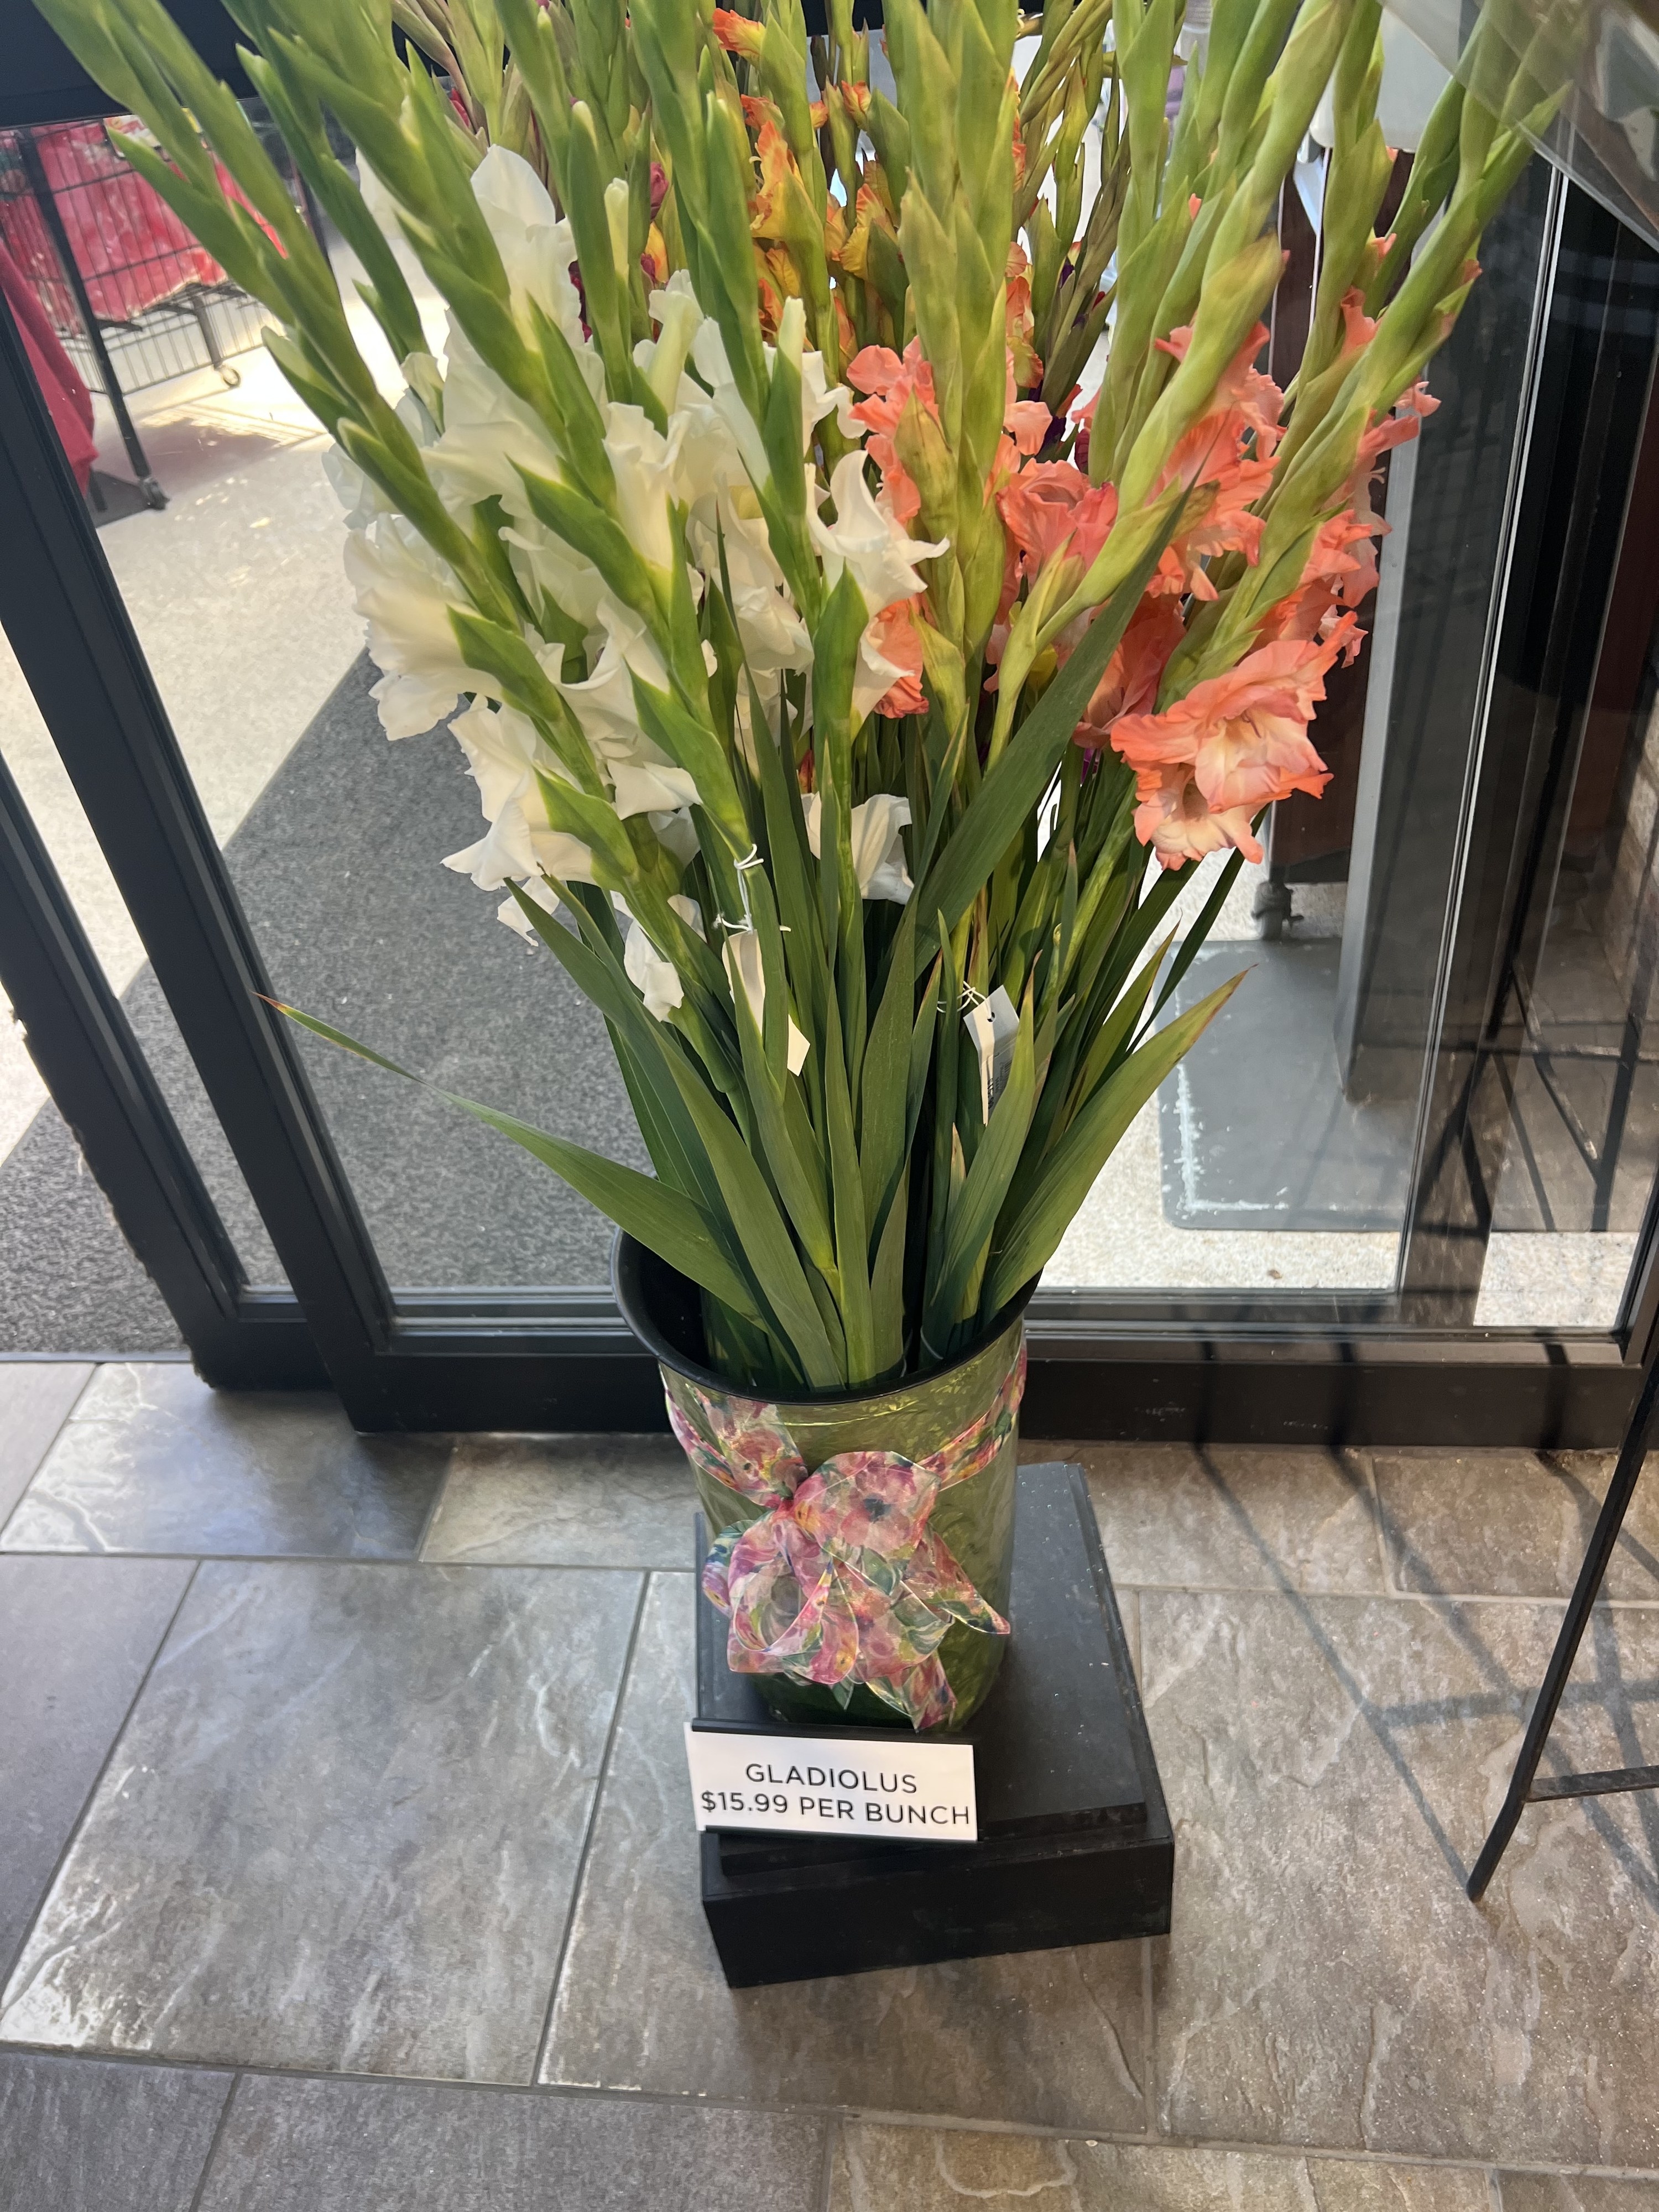 flowers in a vase at a store